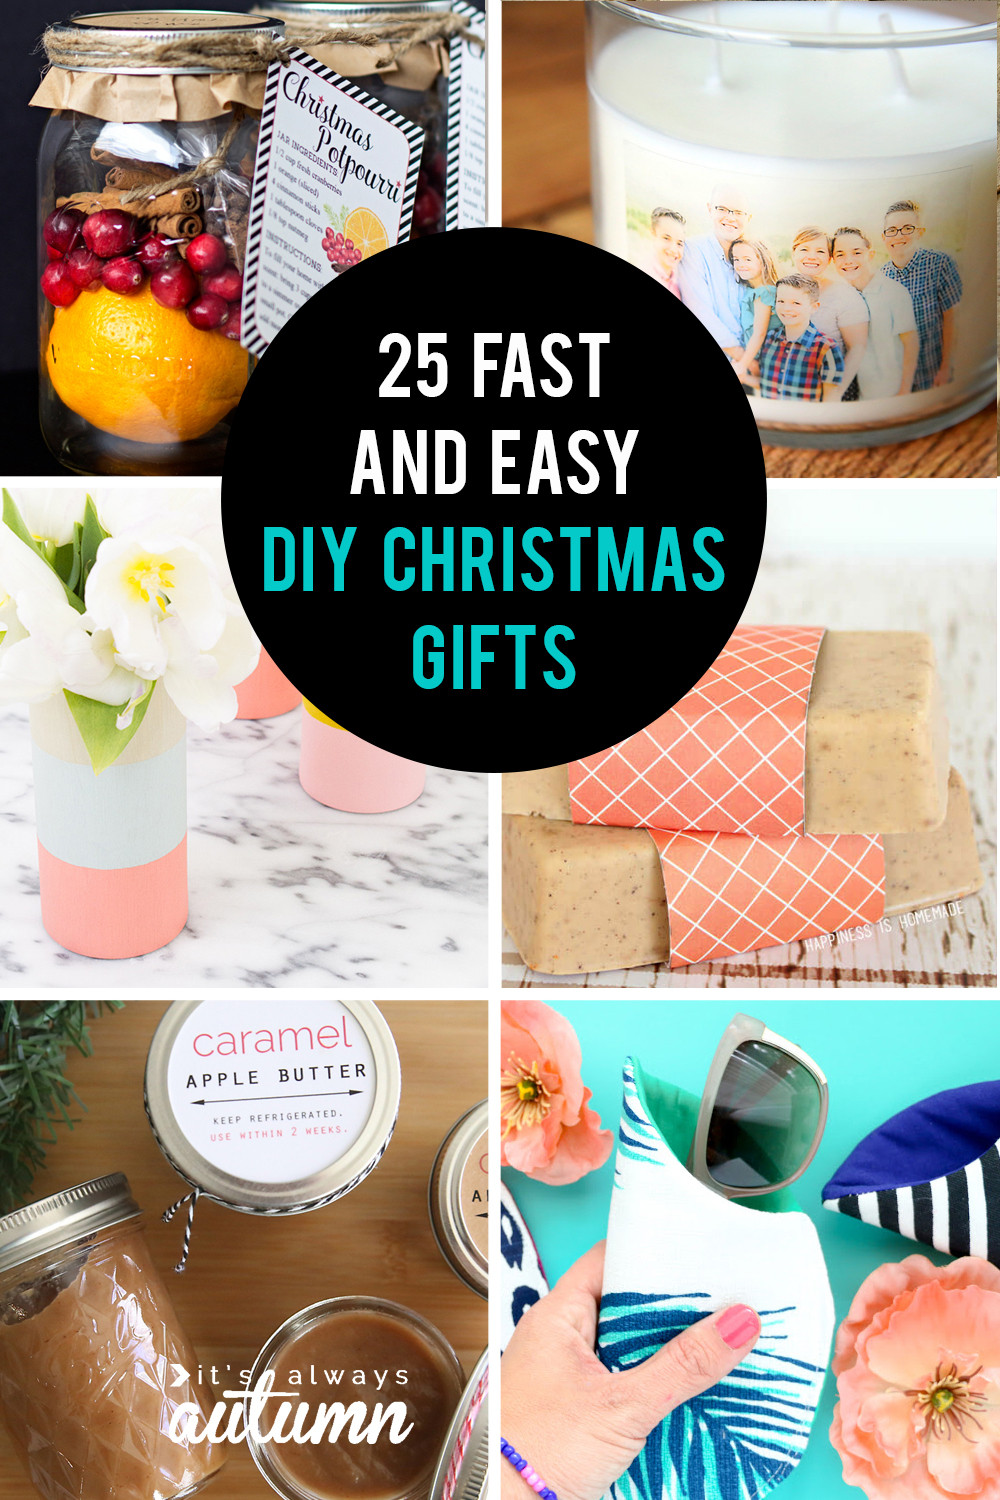 Simple DIY Christmas Gifts
 25 easy homemade Christmas ts you can make in 15